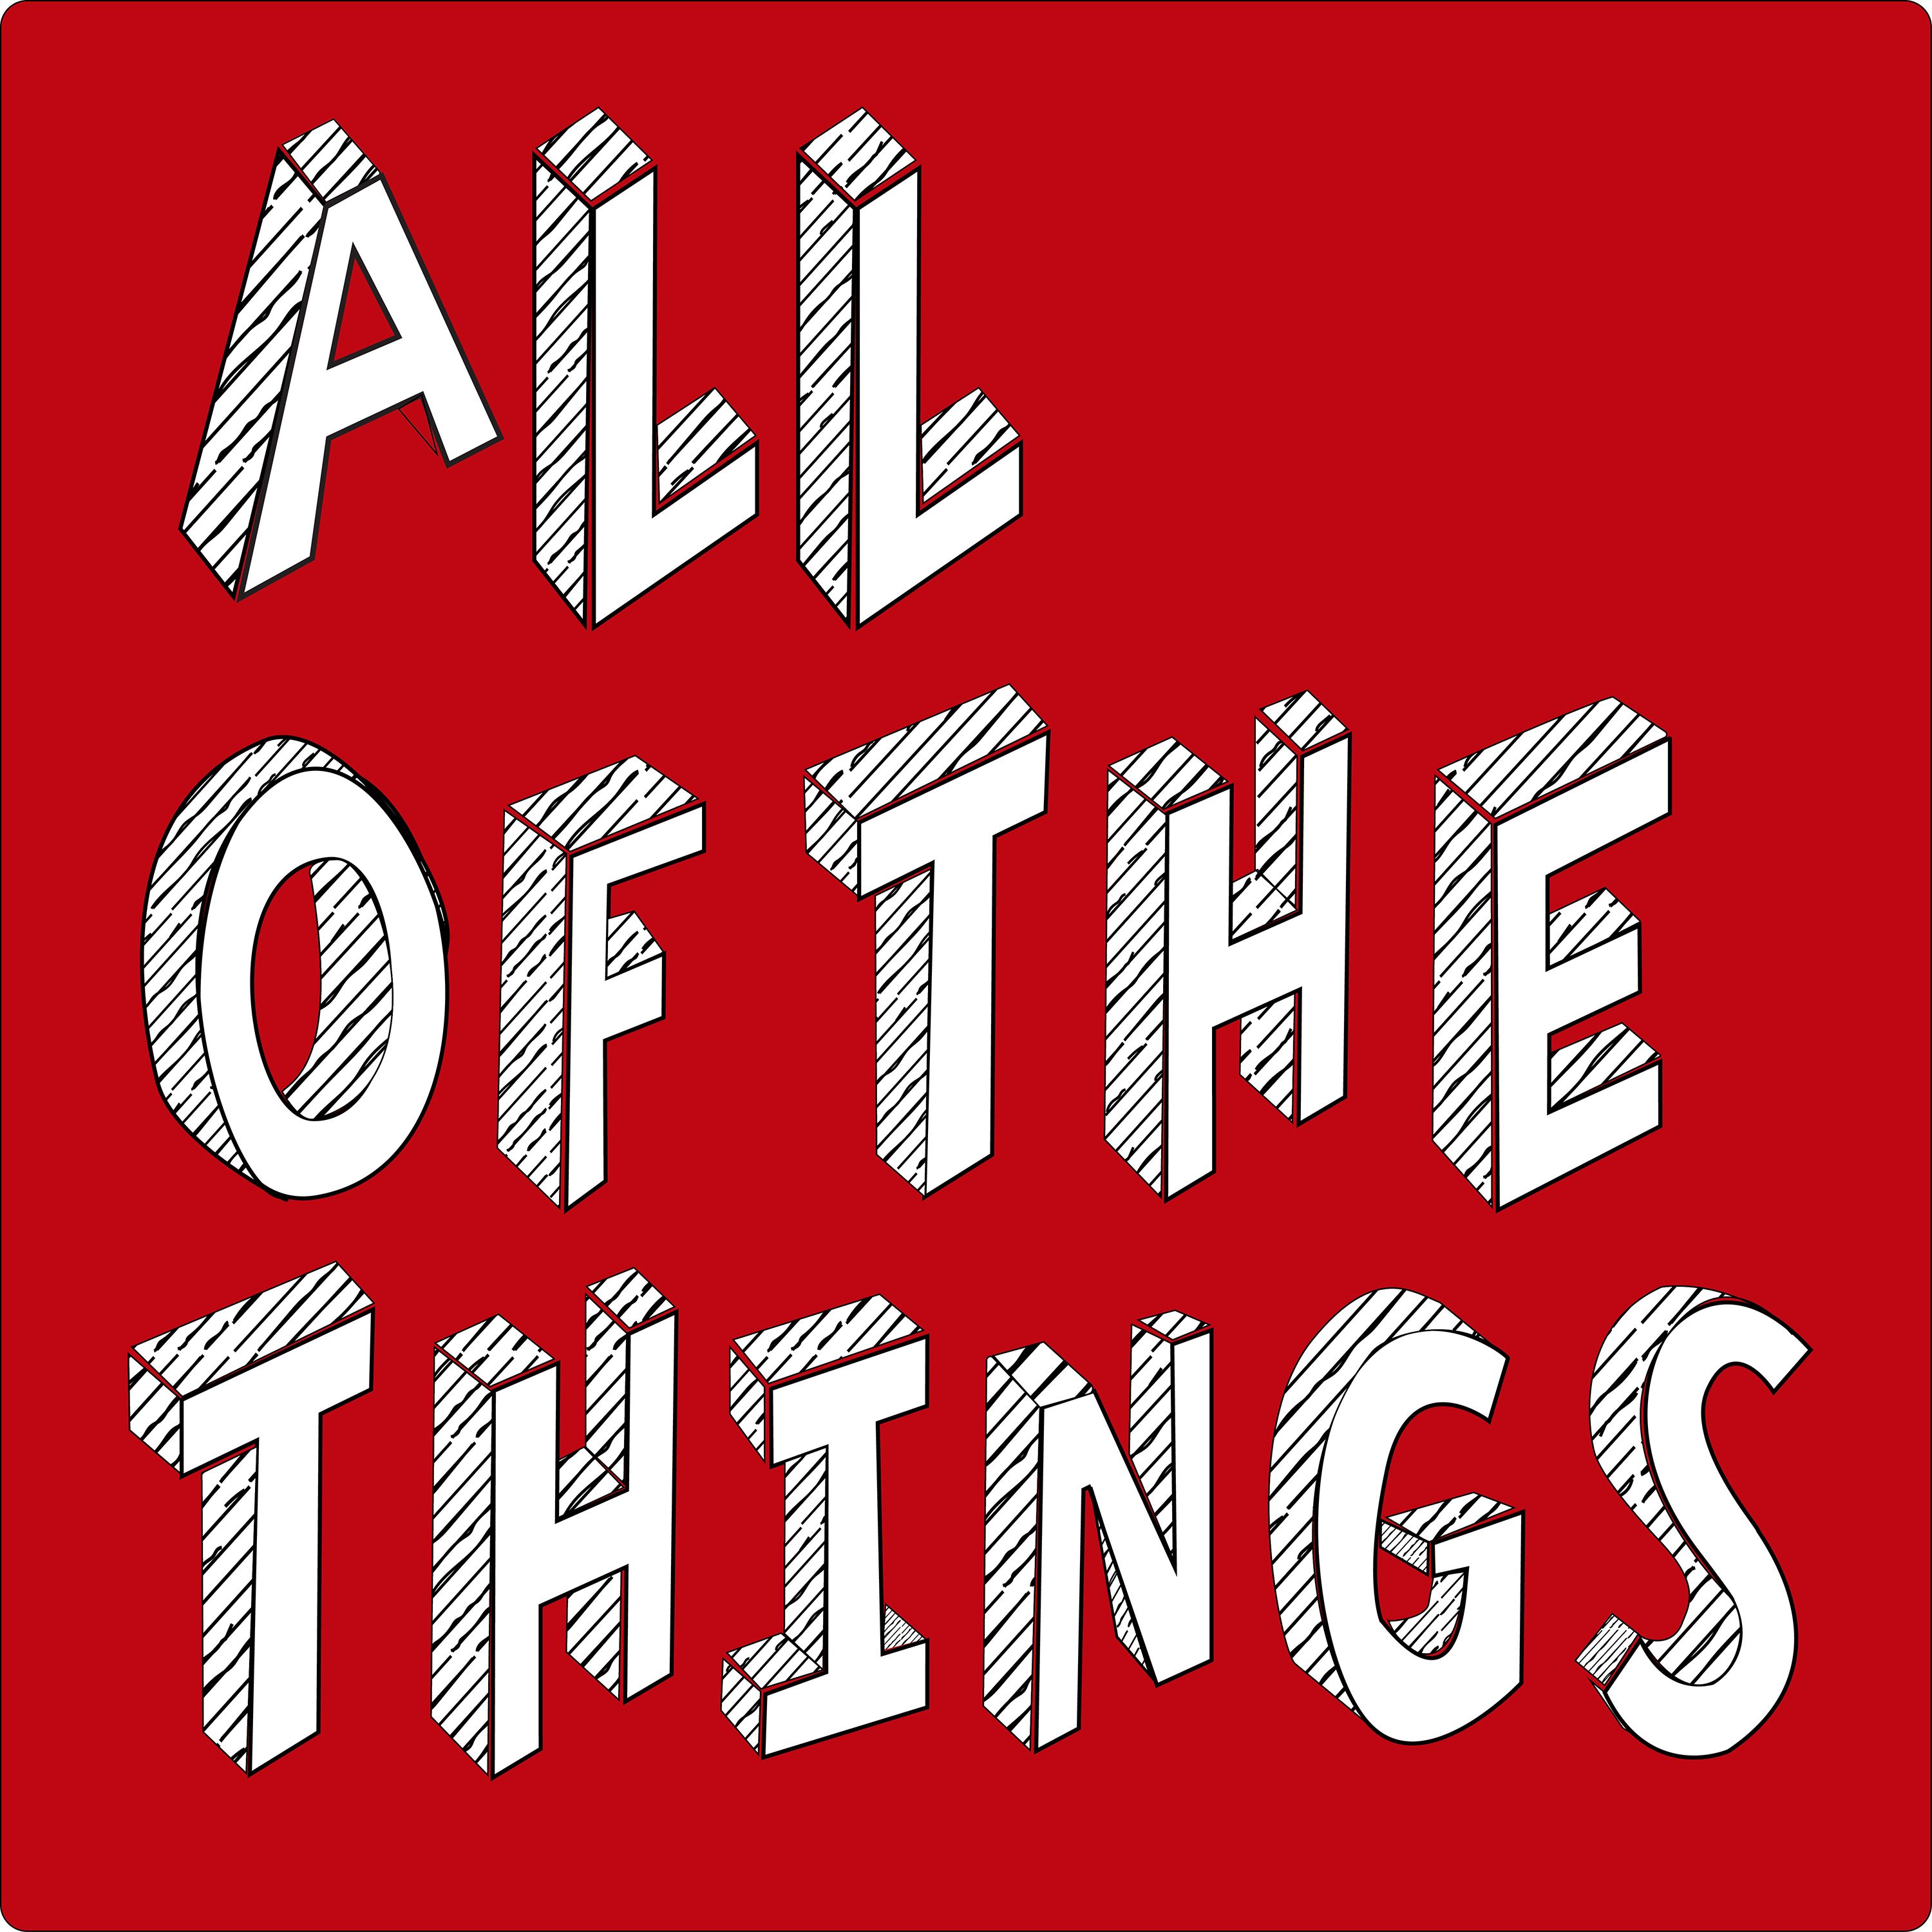 All of the Things